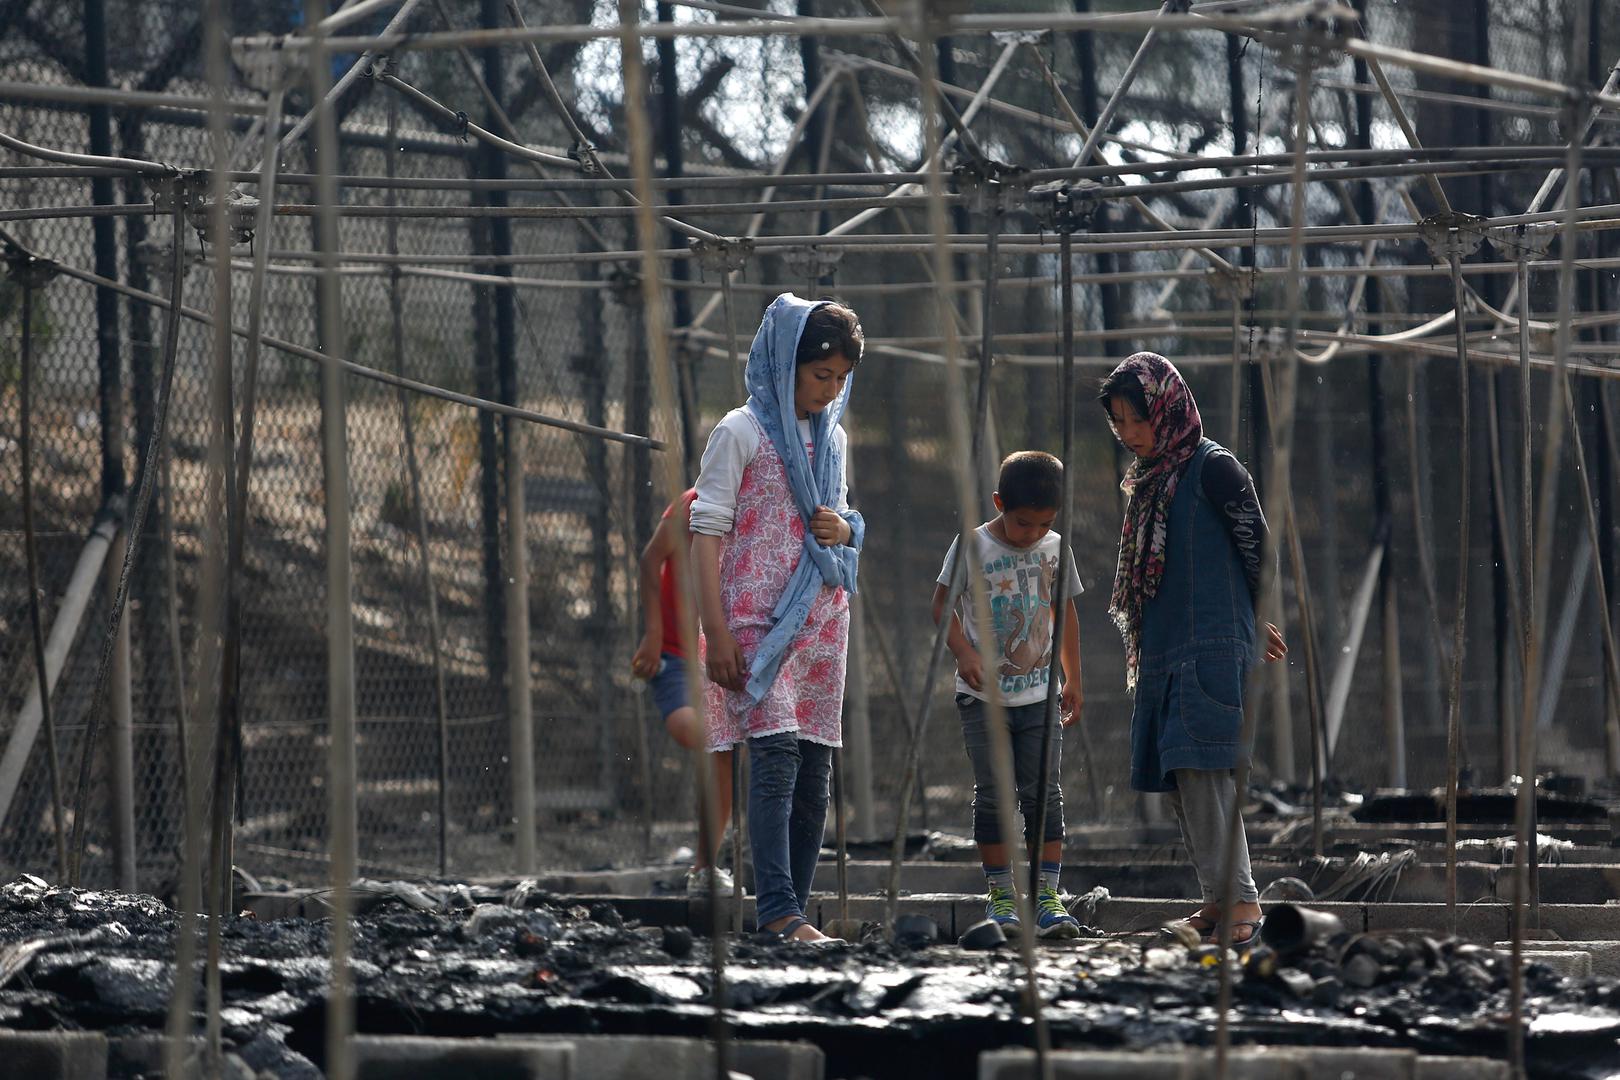 Asylum seekers stand among the remains of a burned tent at the Moria migrant camp, after a fire started in the camp ripped through tents and destroyed containers, on the island of Lesbos, Greece, September 20, 2016.